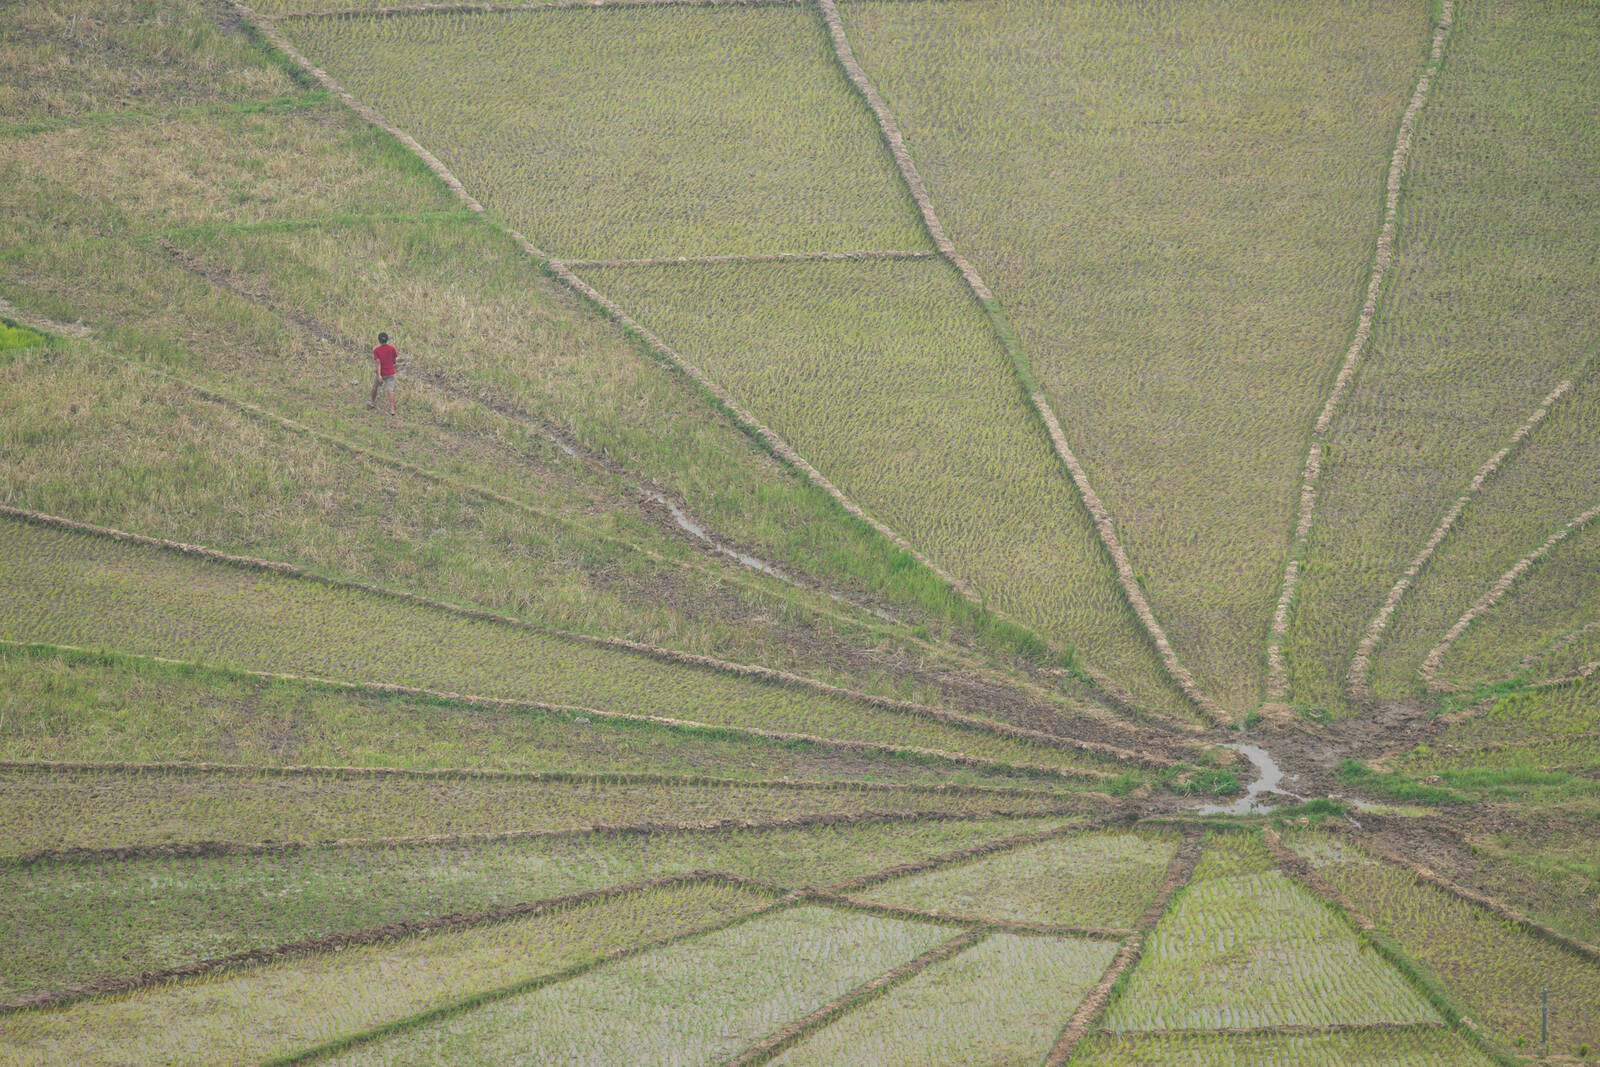 Image of Cancar Spider Web Rice Fields by Luka Esenko